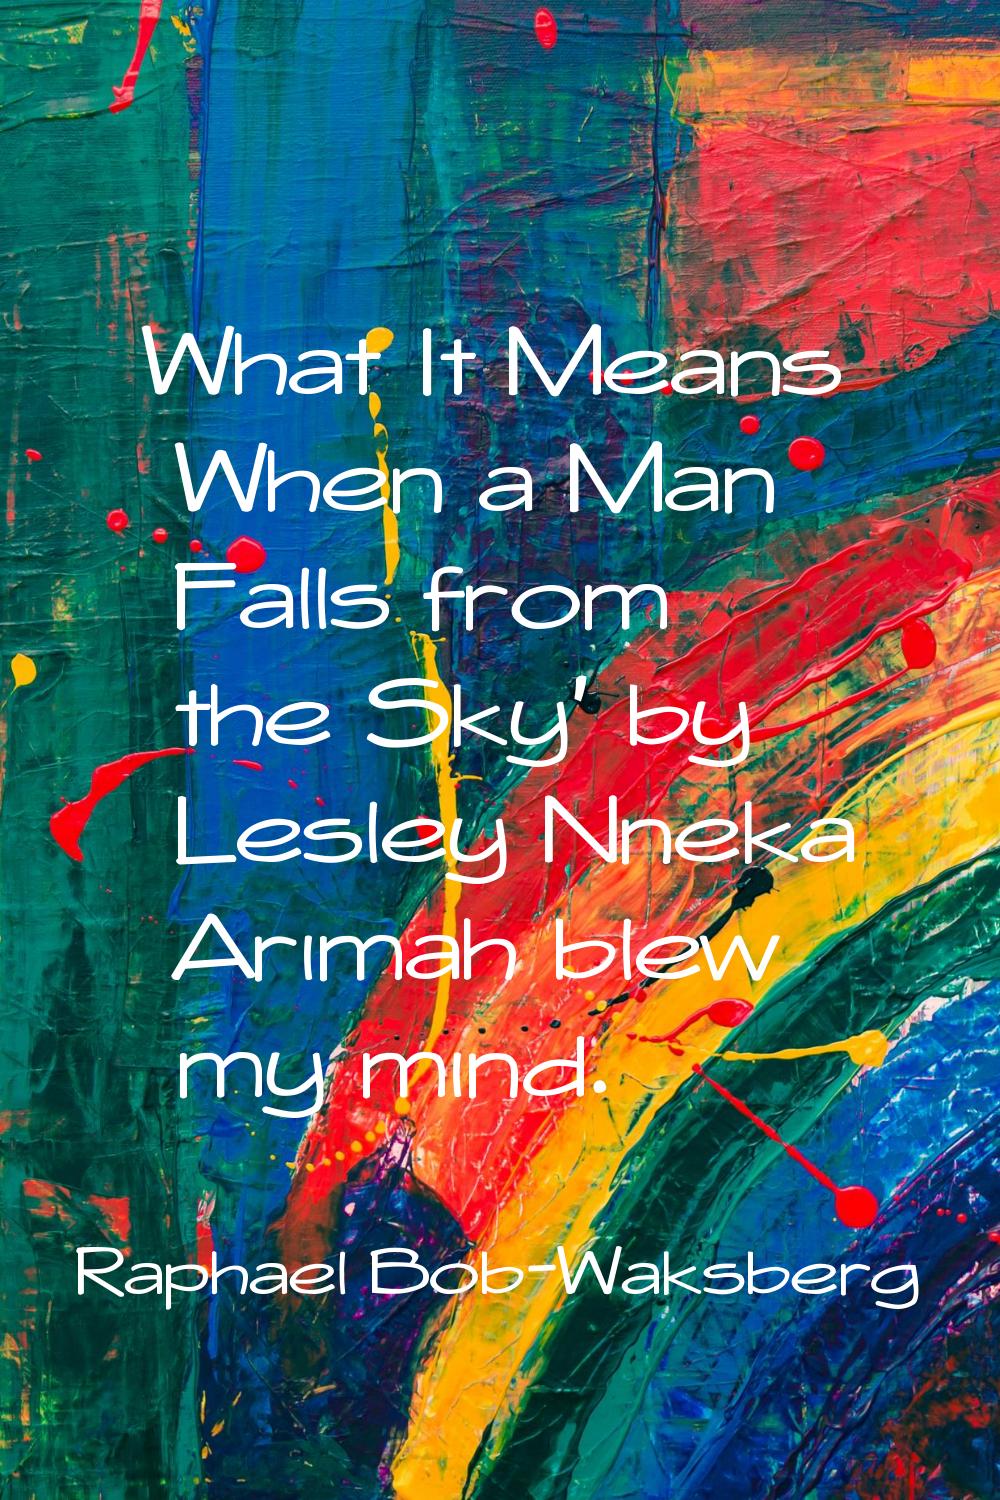 What It Means When a Man Falls from the Sky' by Lesley Nneka Arimah blew my mind.